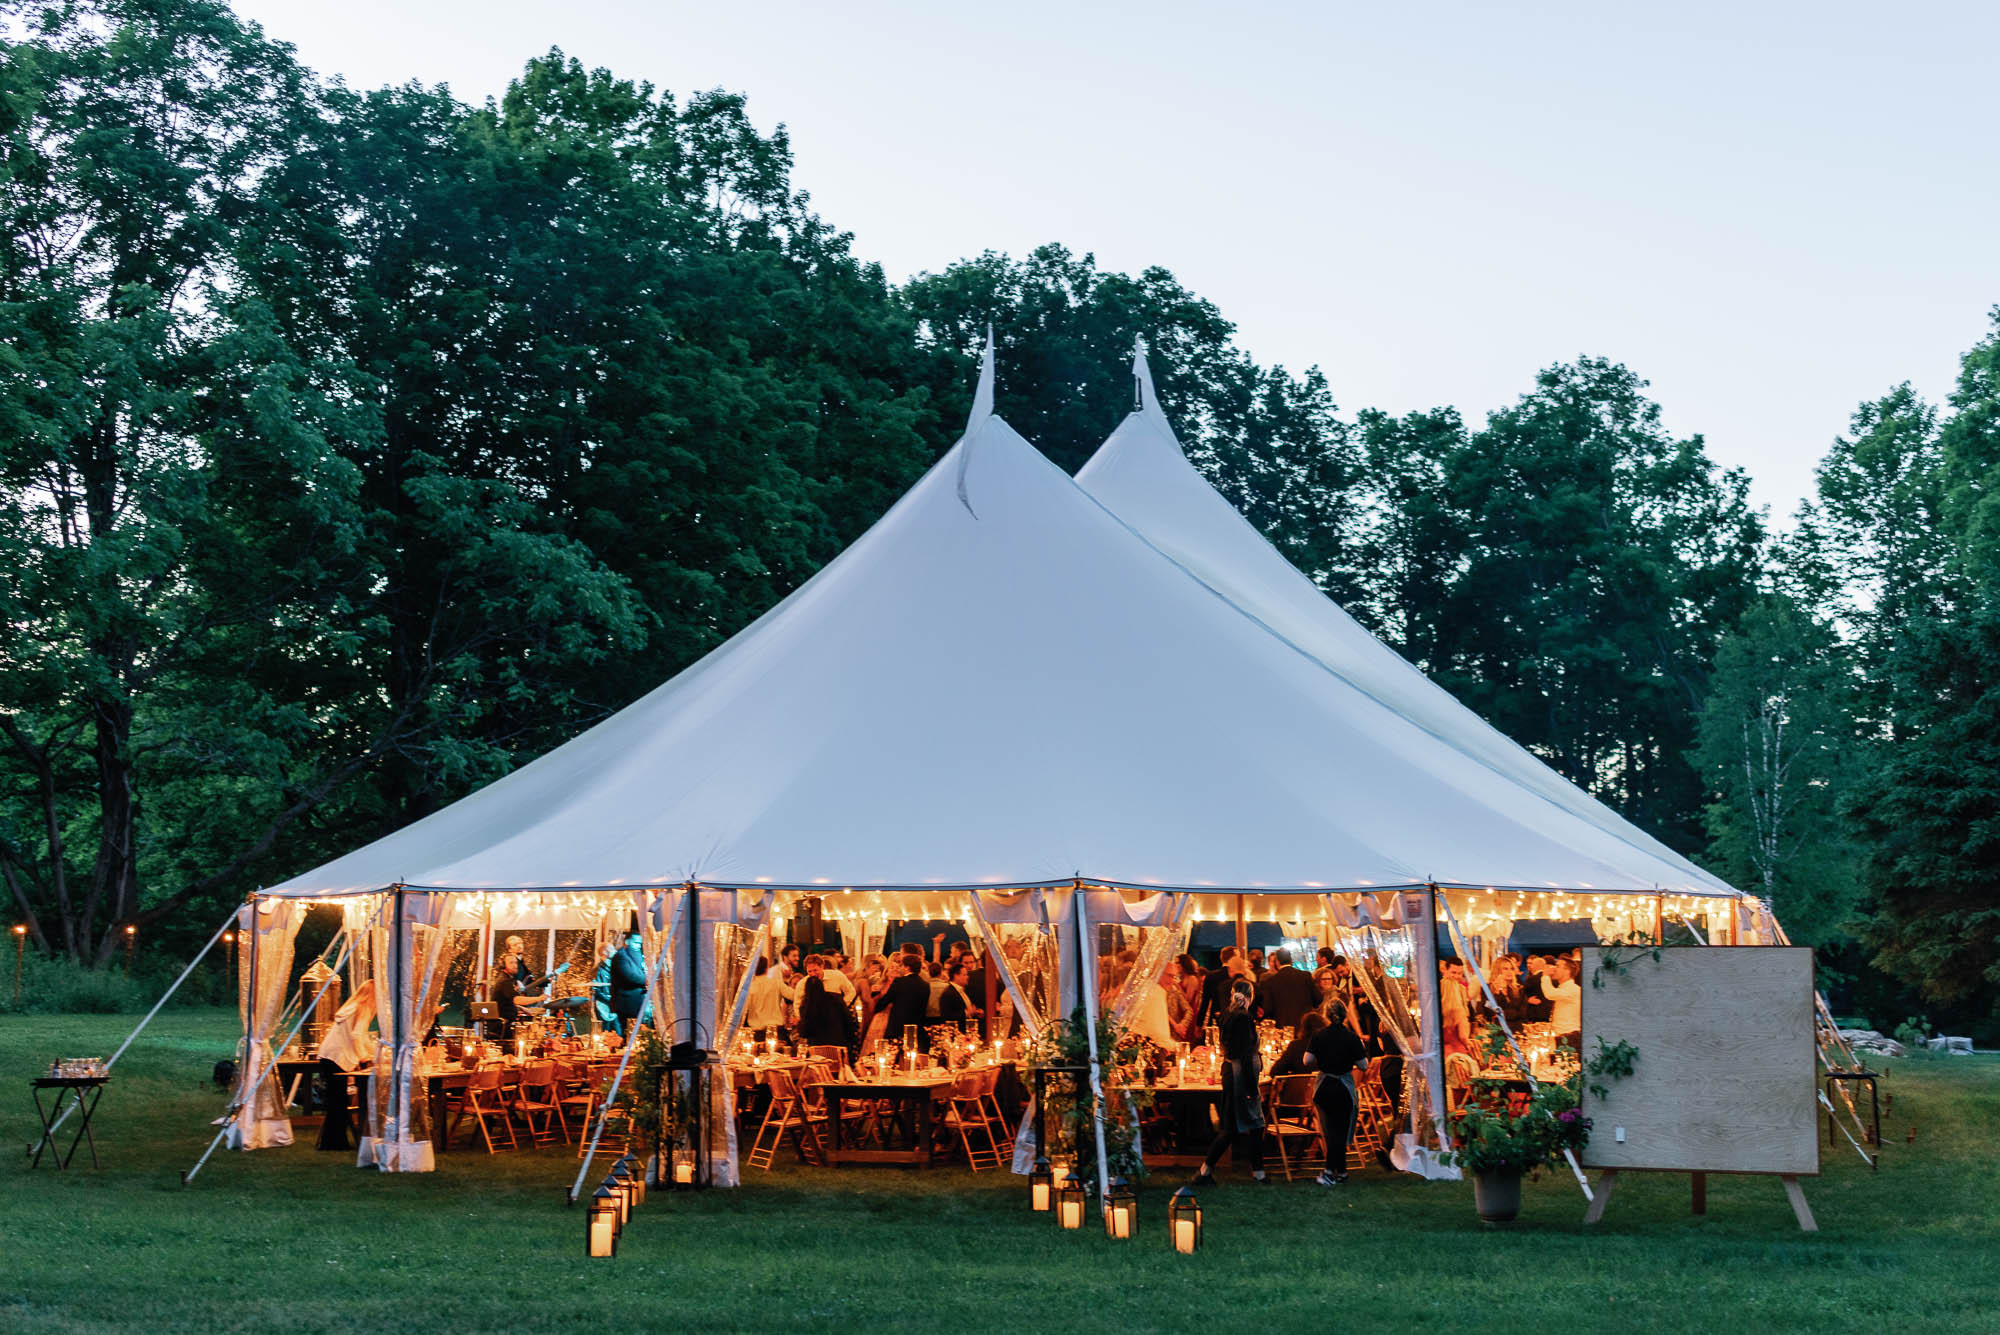 a lively wedding reception, outdoors, under a large white tent - heartfelt guest experience